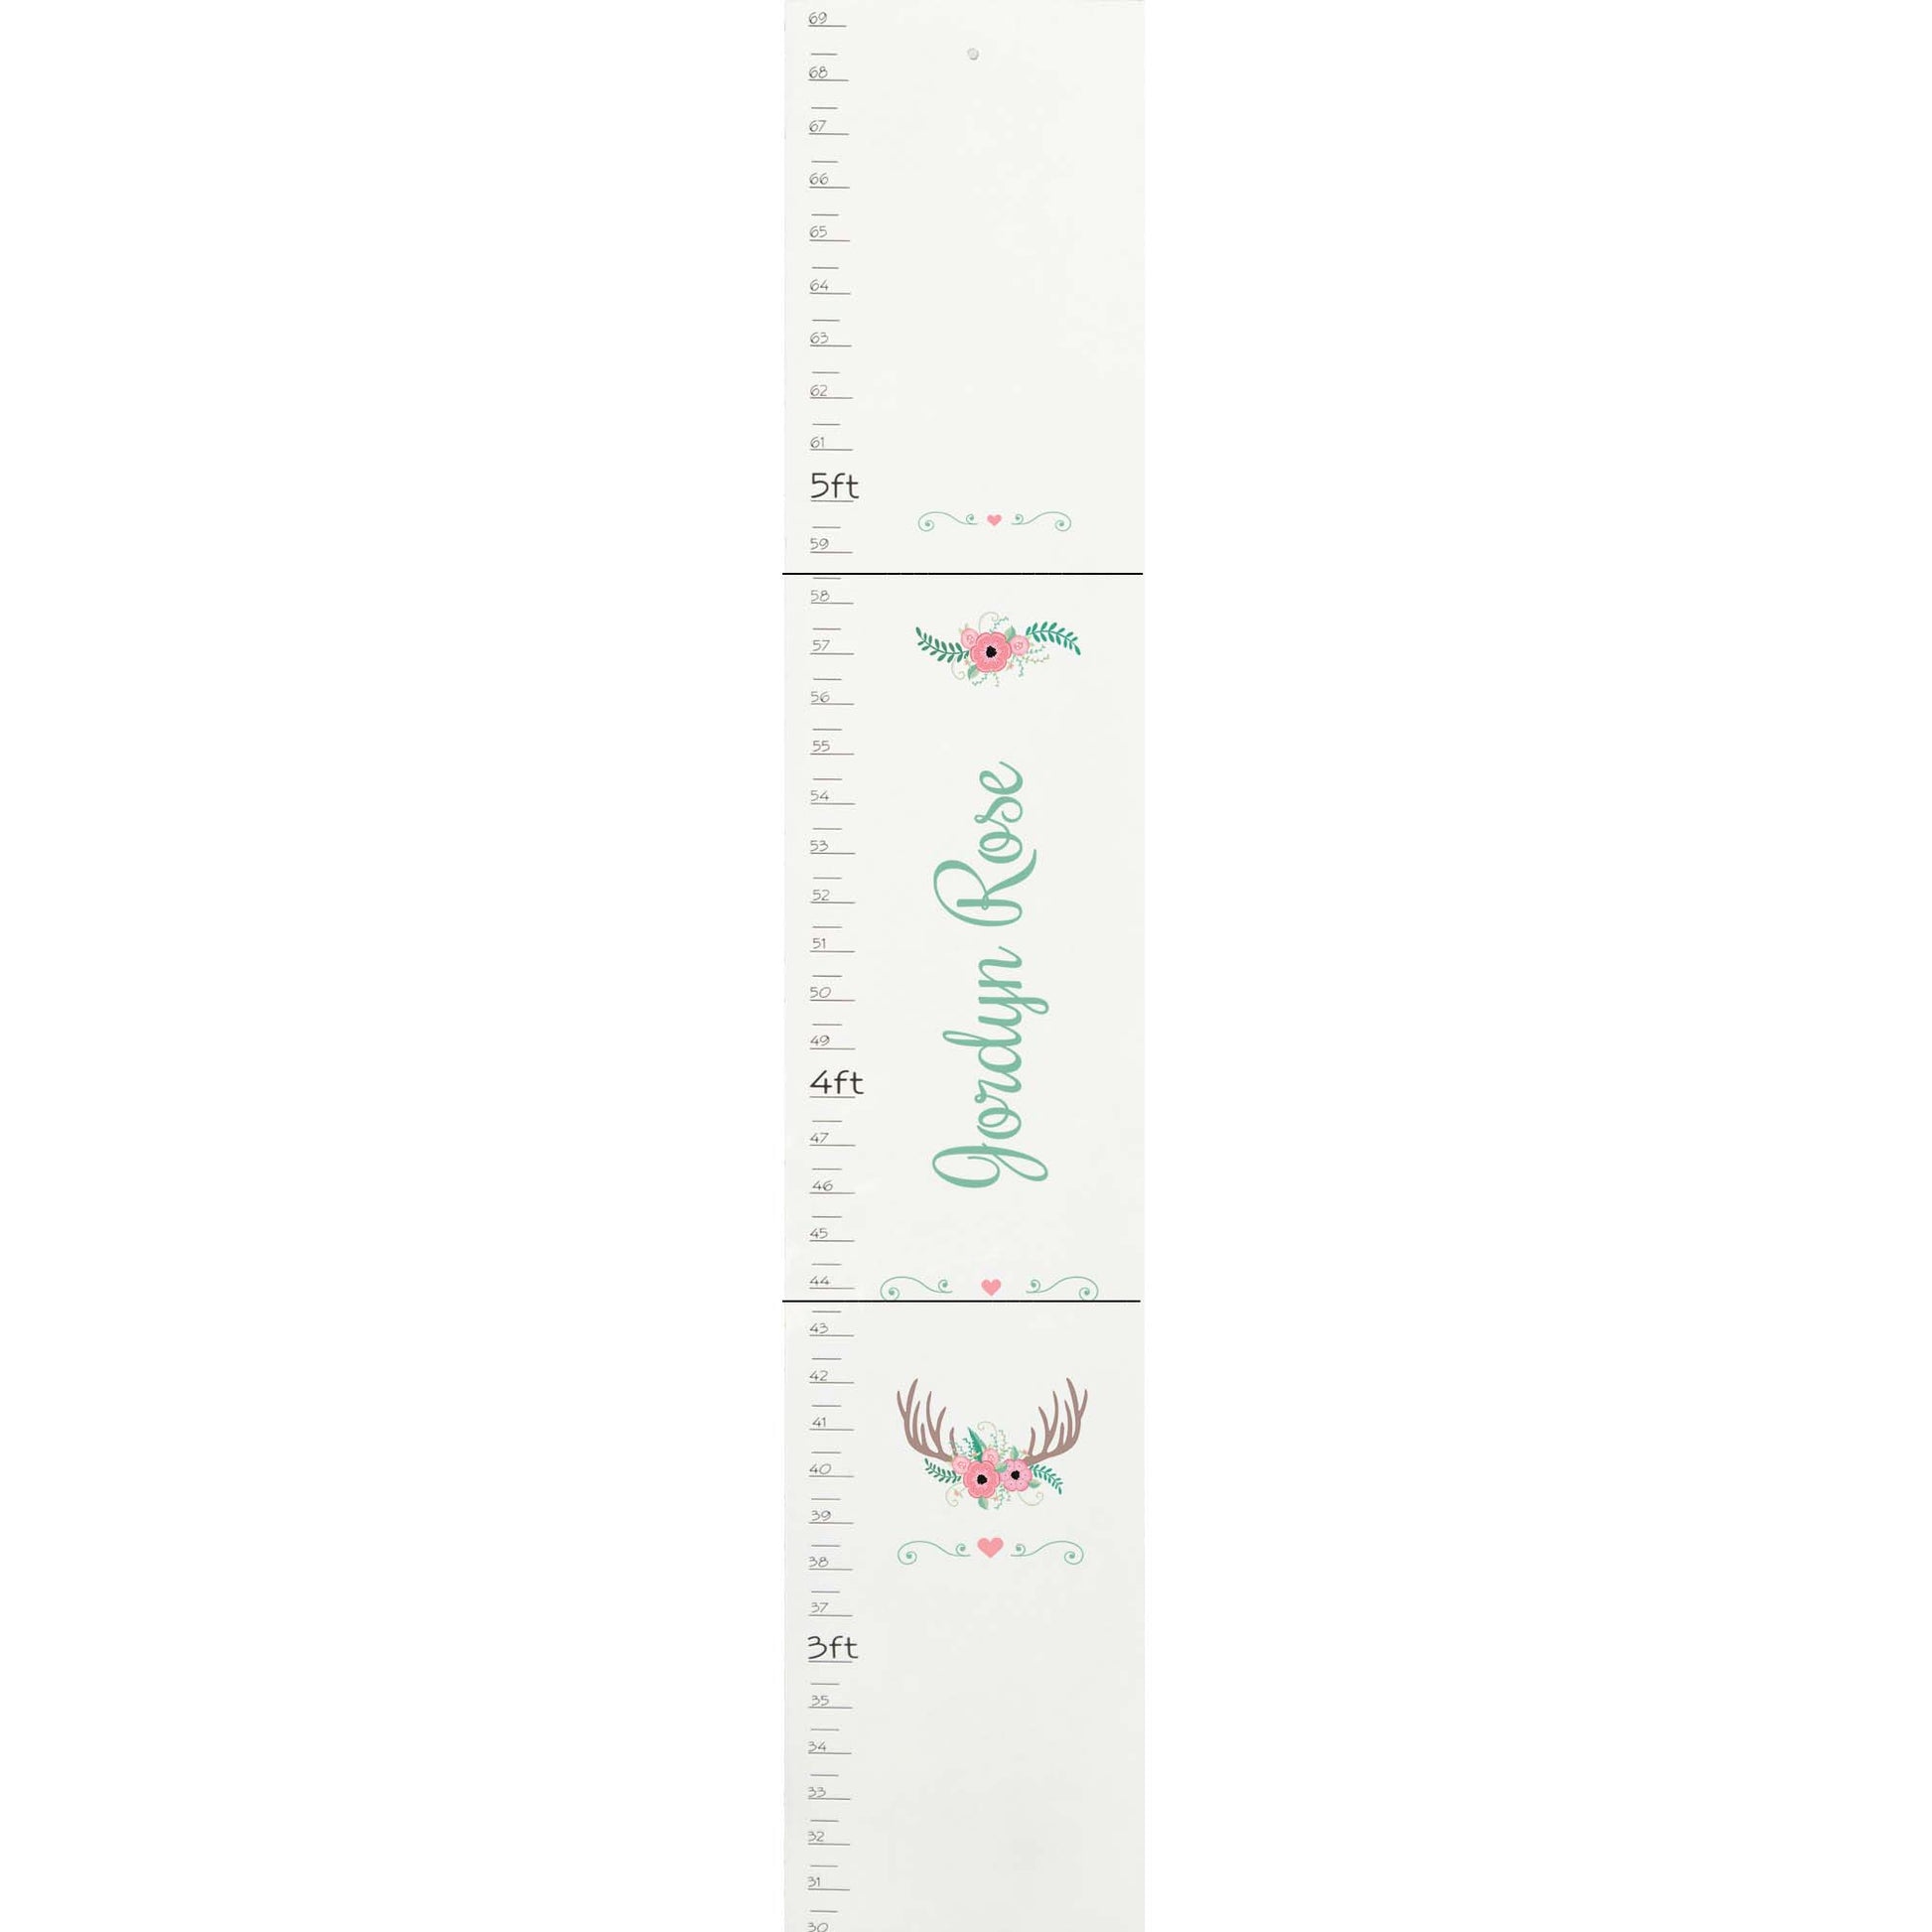 Personalized White Growth Chart With Floral Antlers Design